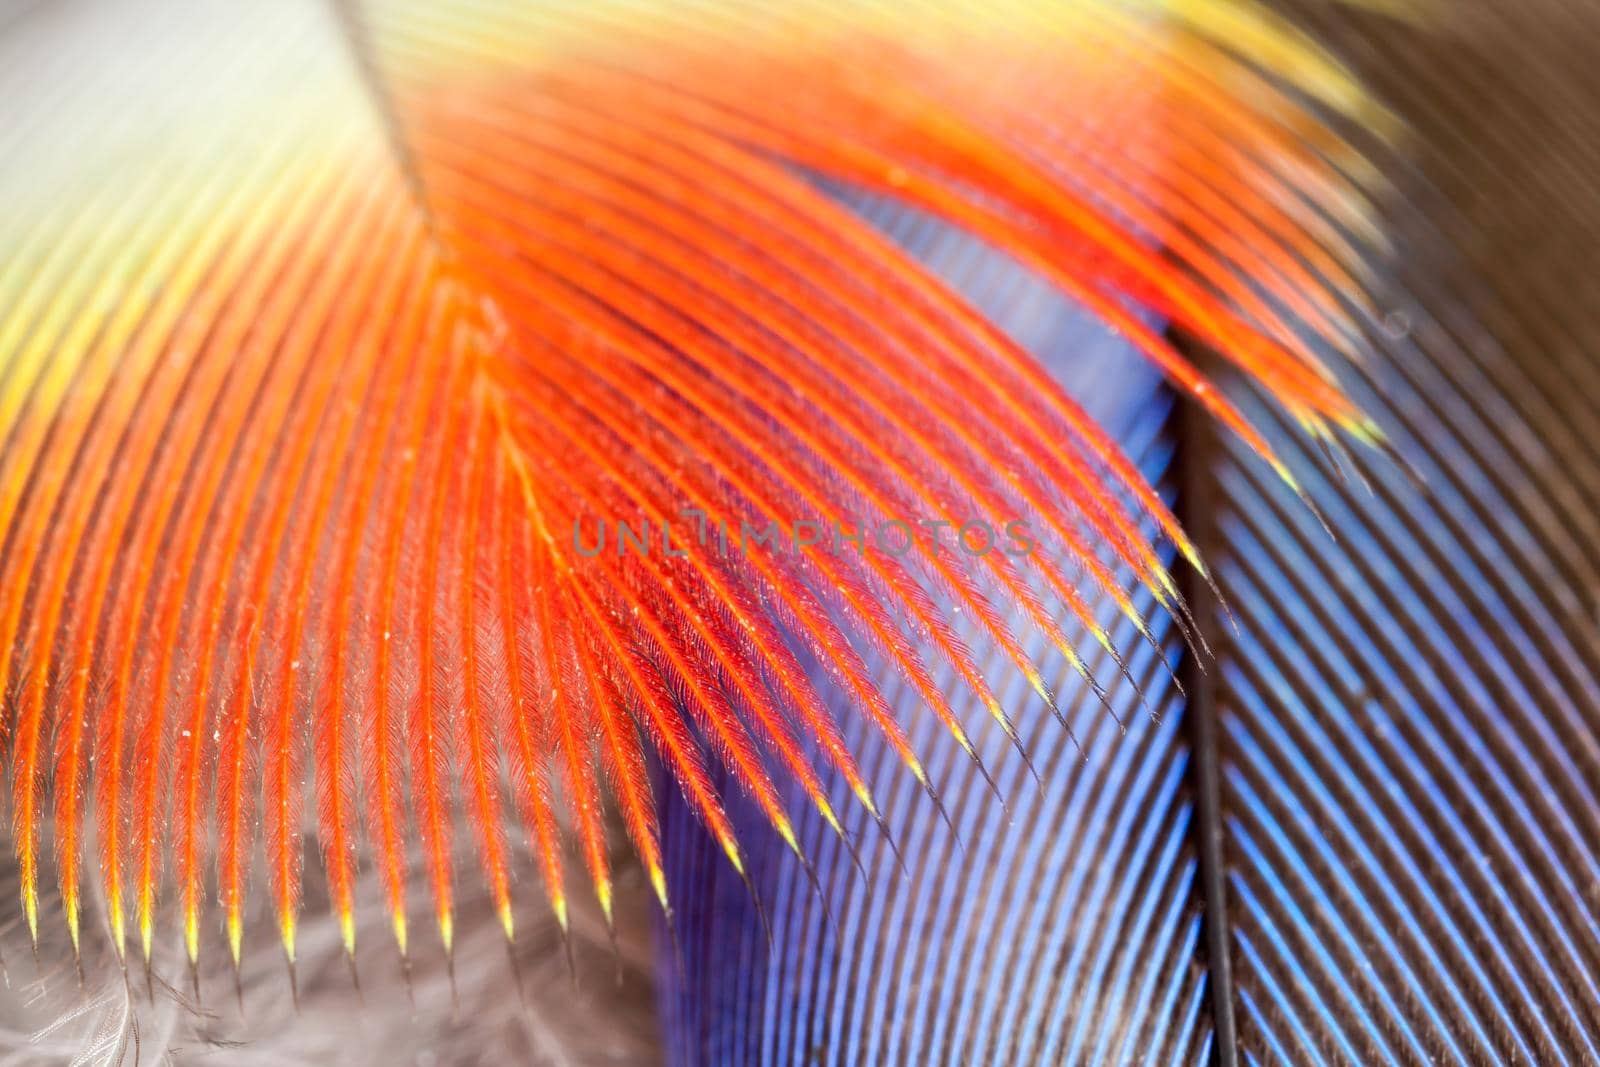 Red and blue parrot feathers in close up